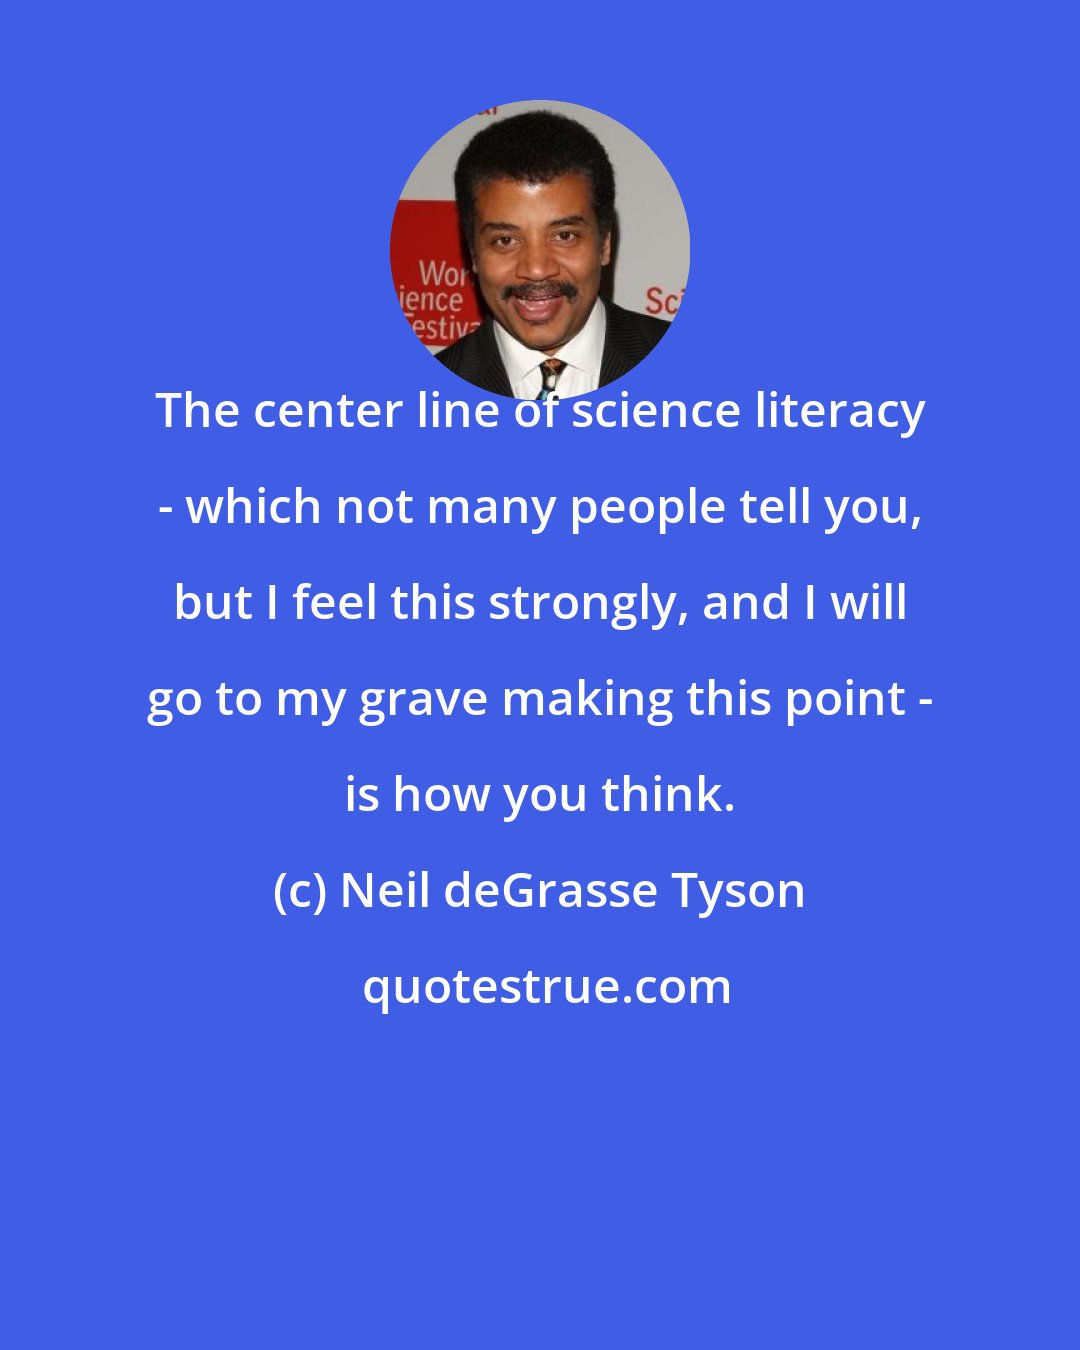 Neil deGrasse Tyson: The center line of science literacy - which not many people tell you, but I feel this strongly, and I will go to my grave making this point - is how you think.